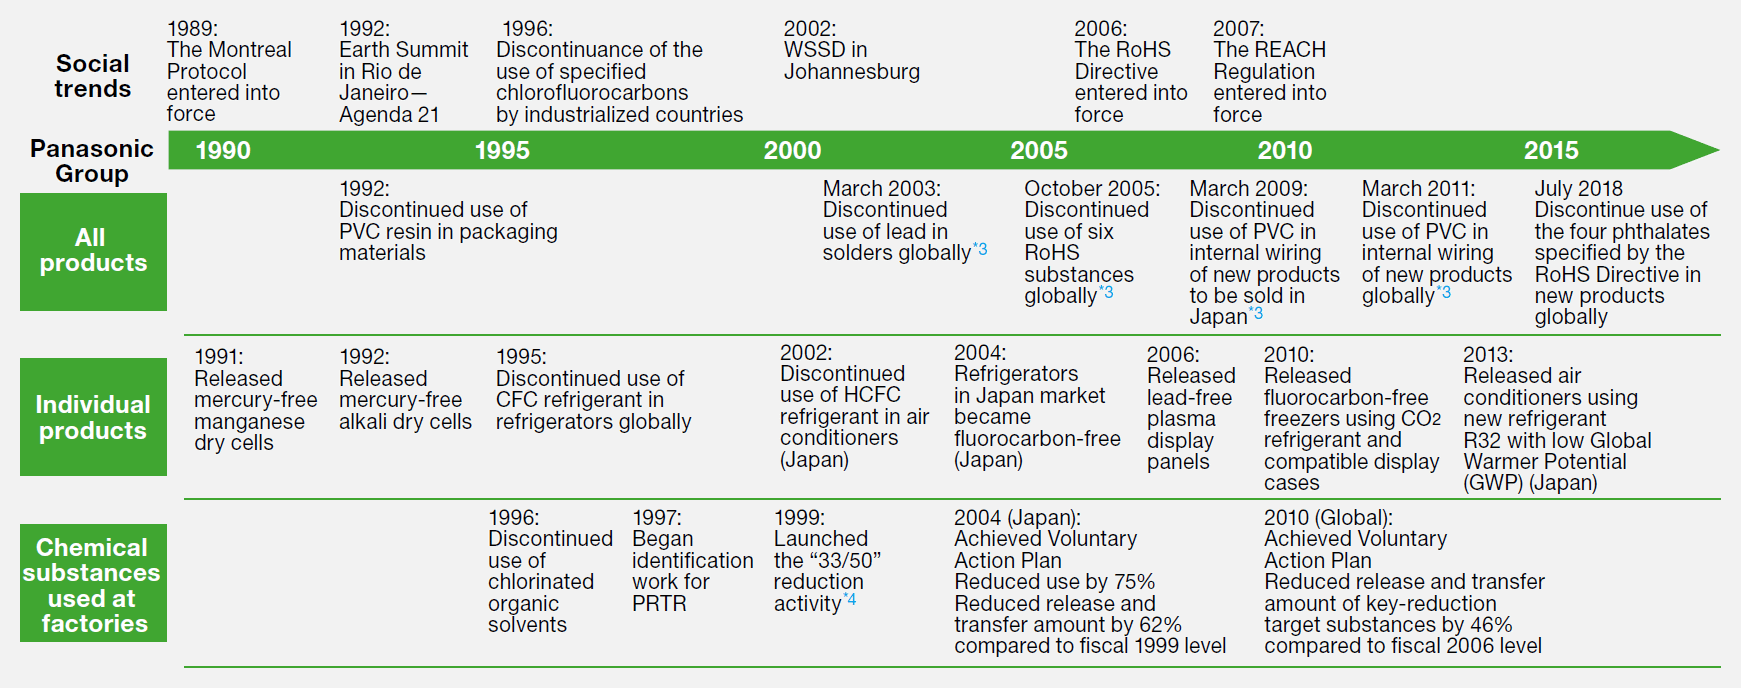 History of Our Initiatives to Reduce the Environmental Impact of Chemical Substances